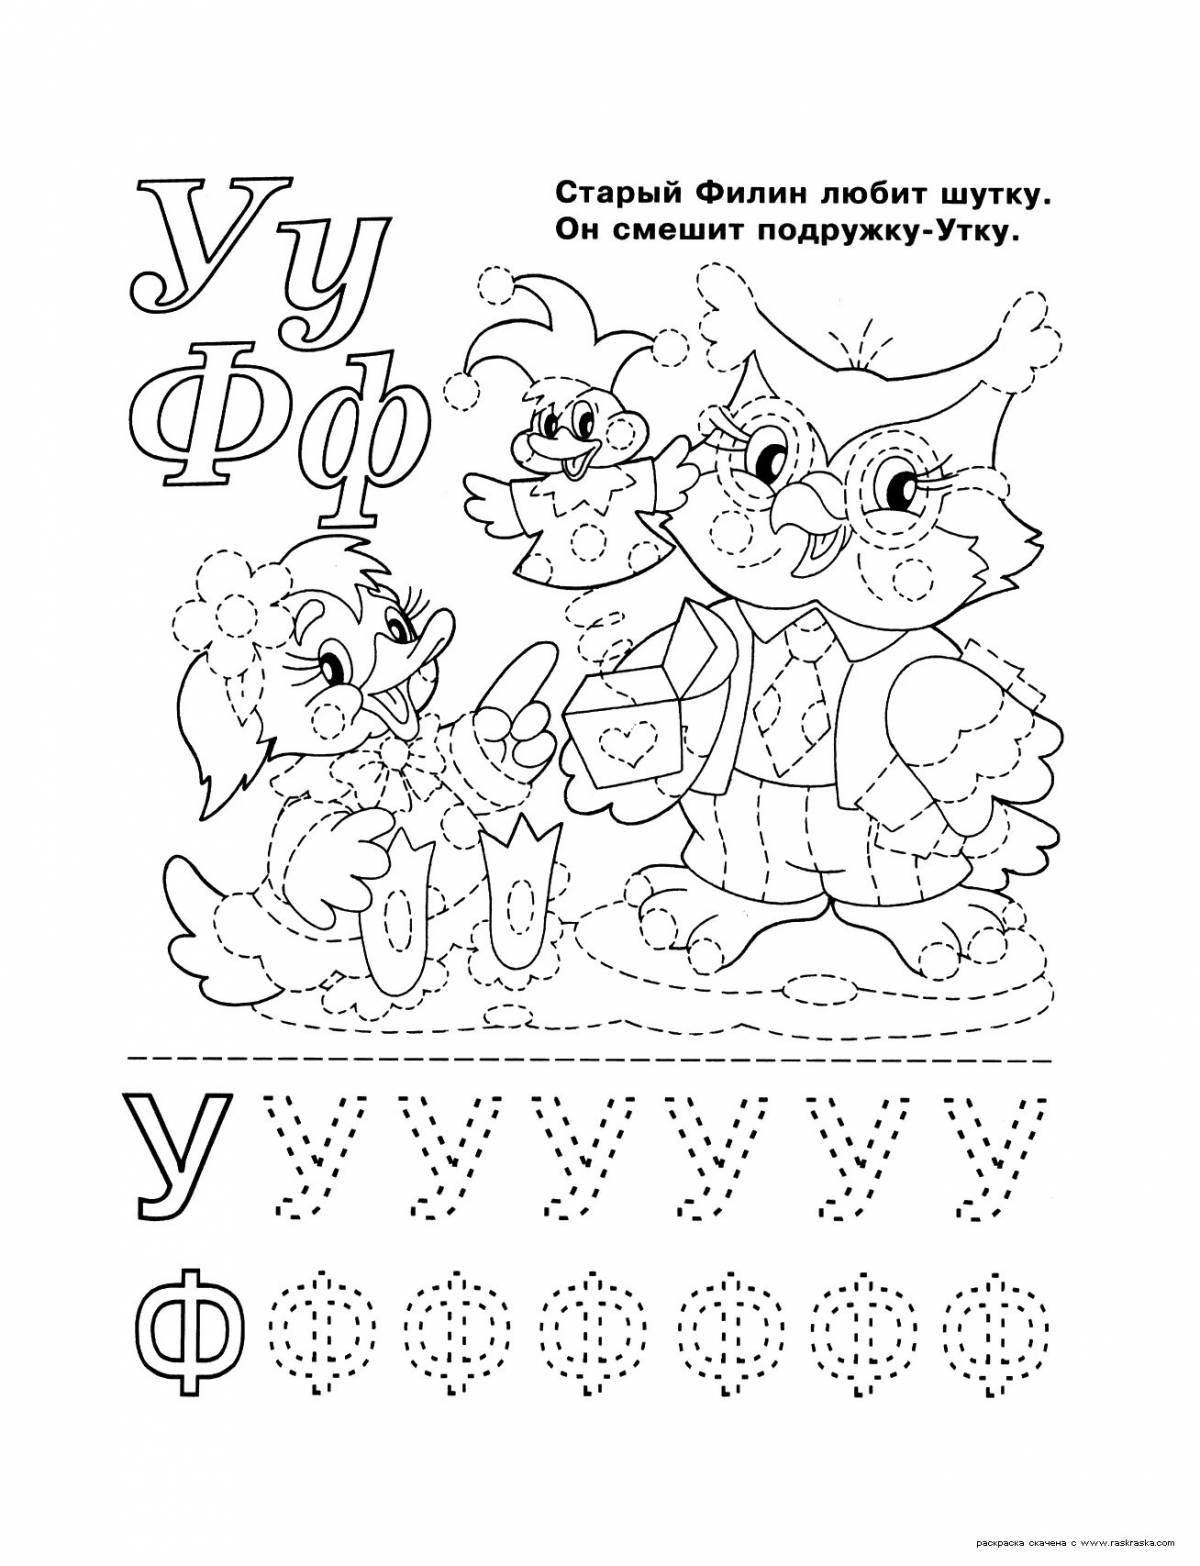 Colourful coloring book with alphabet for children 5-6 years old